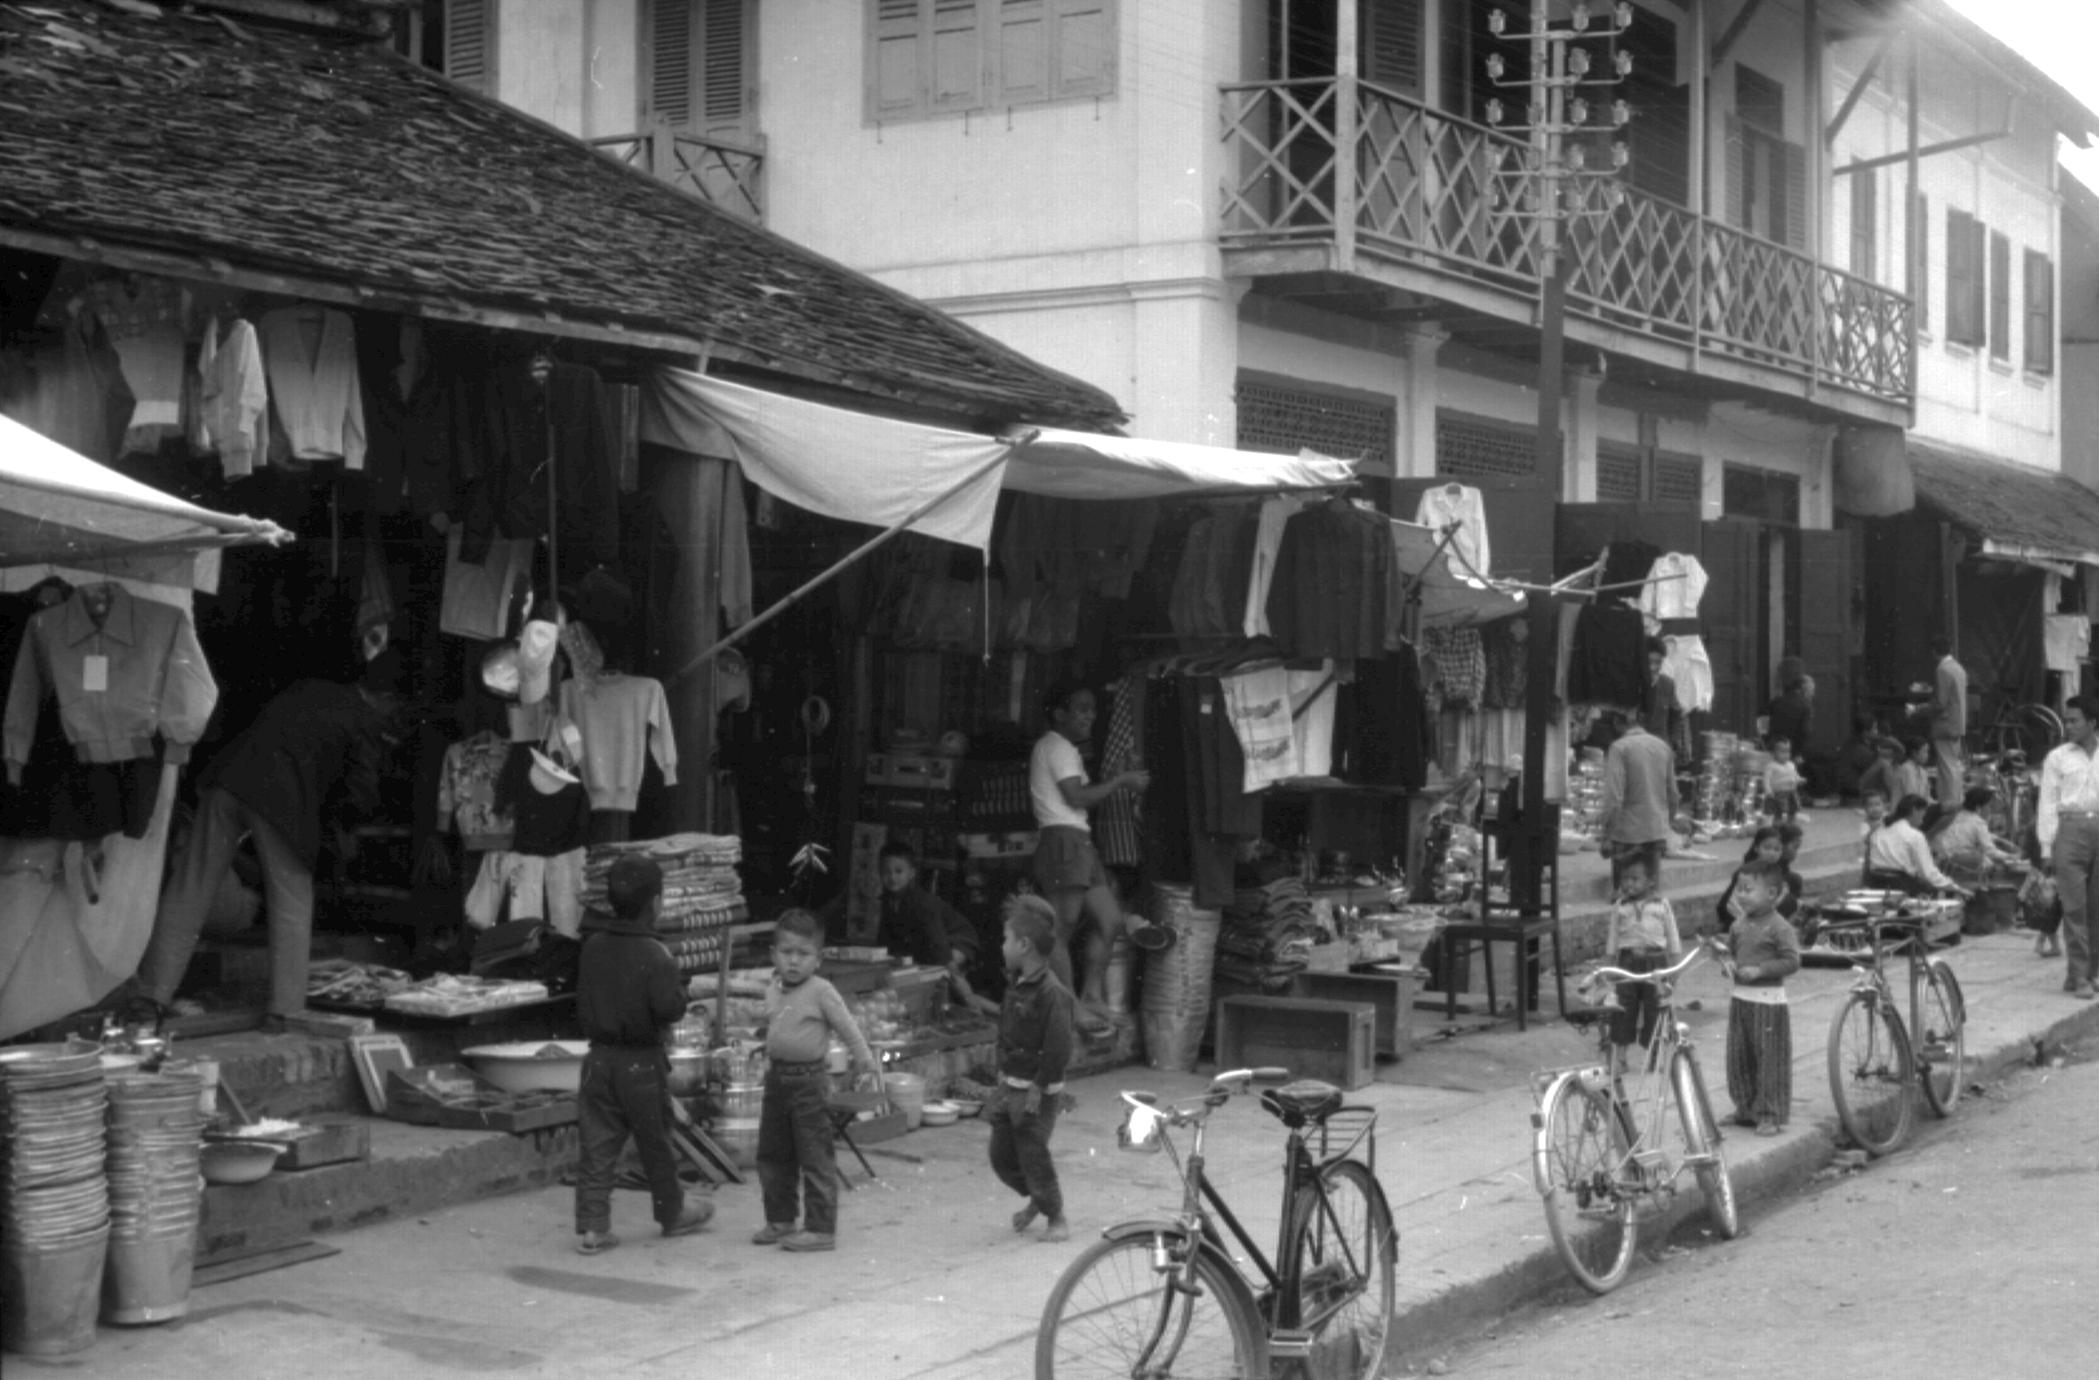 View of a number of shops along main street, bicycles lined up, selling tin pails, clothing, electric pole visible, upper story probably used for residence